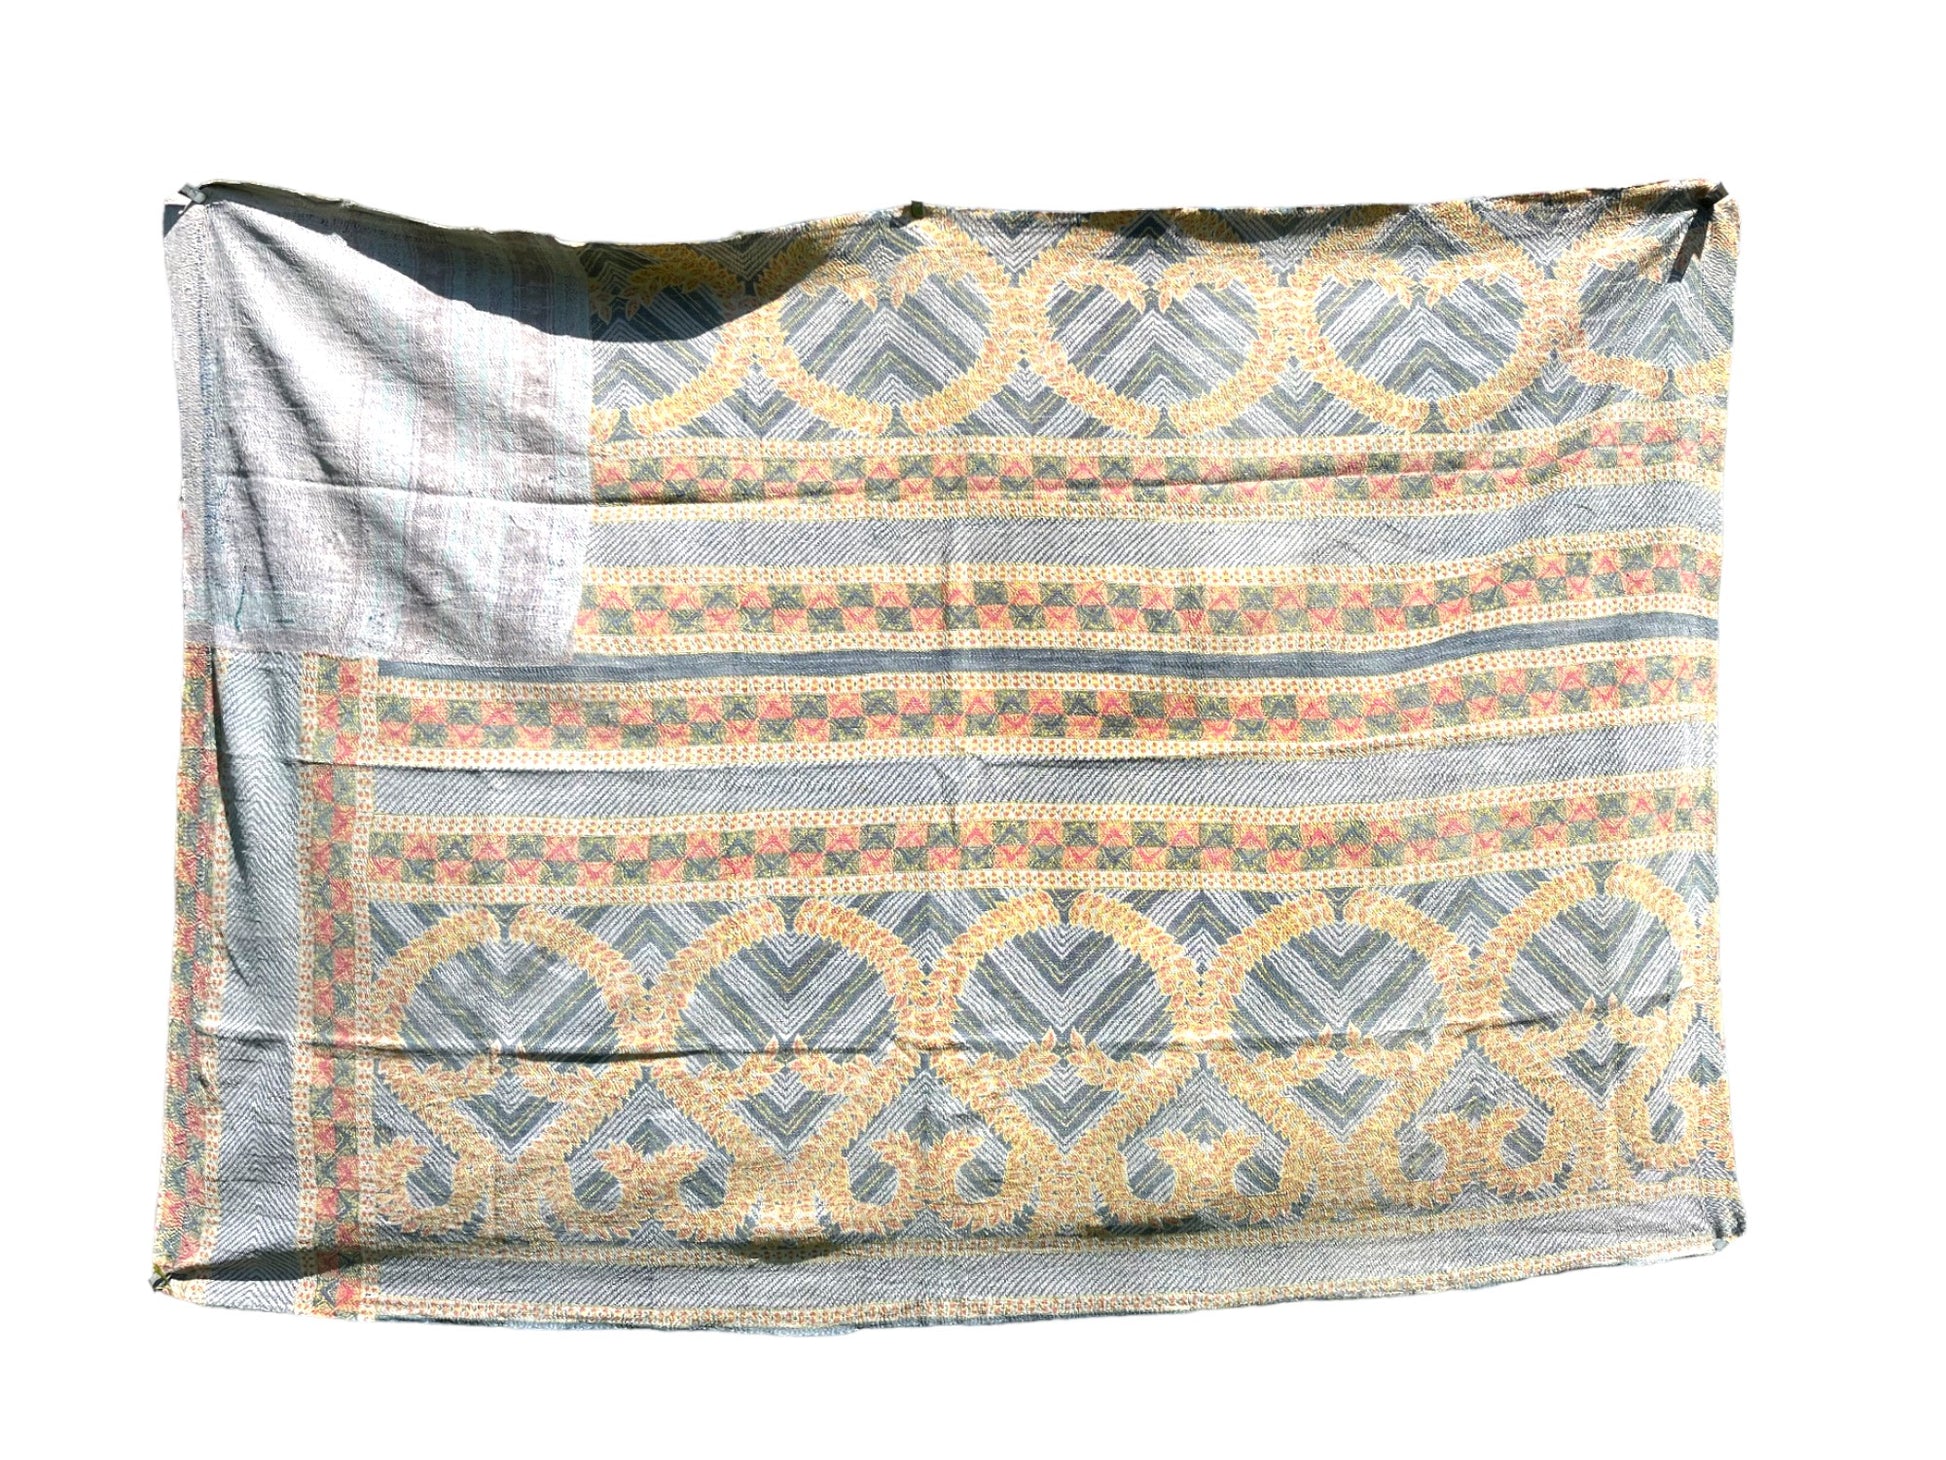 Blue and yellow kantha quilt